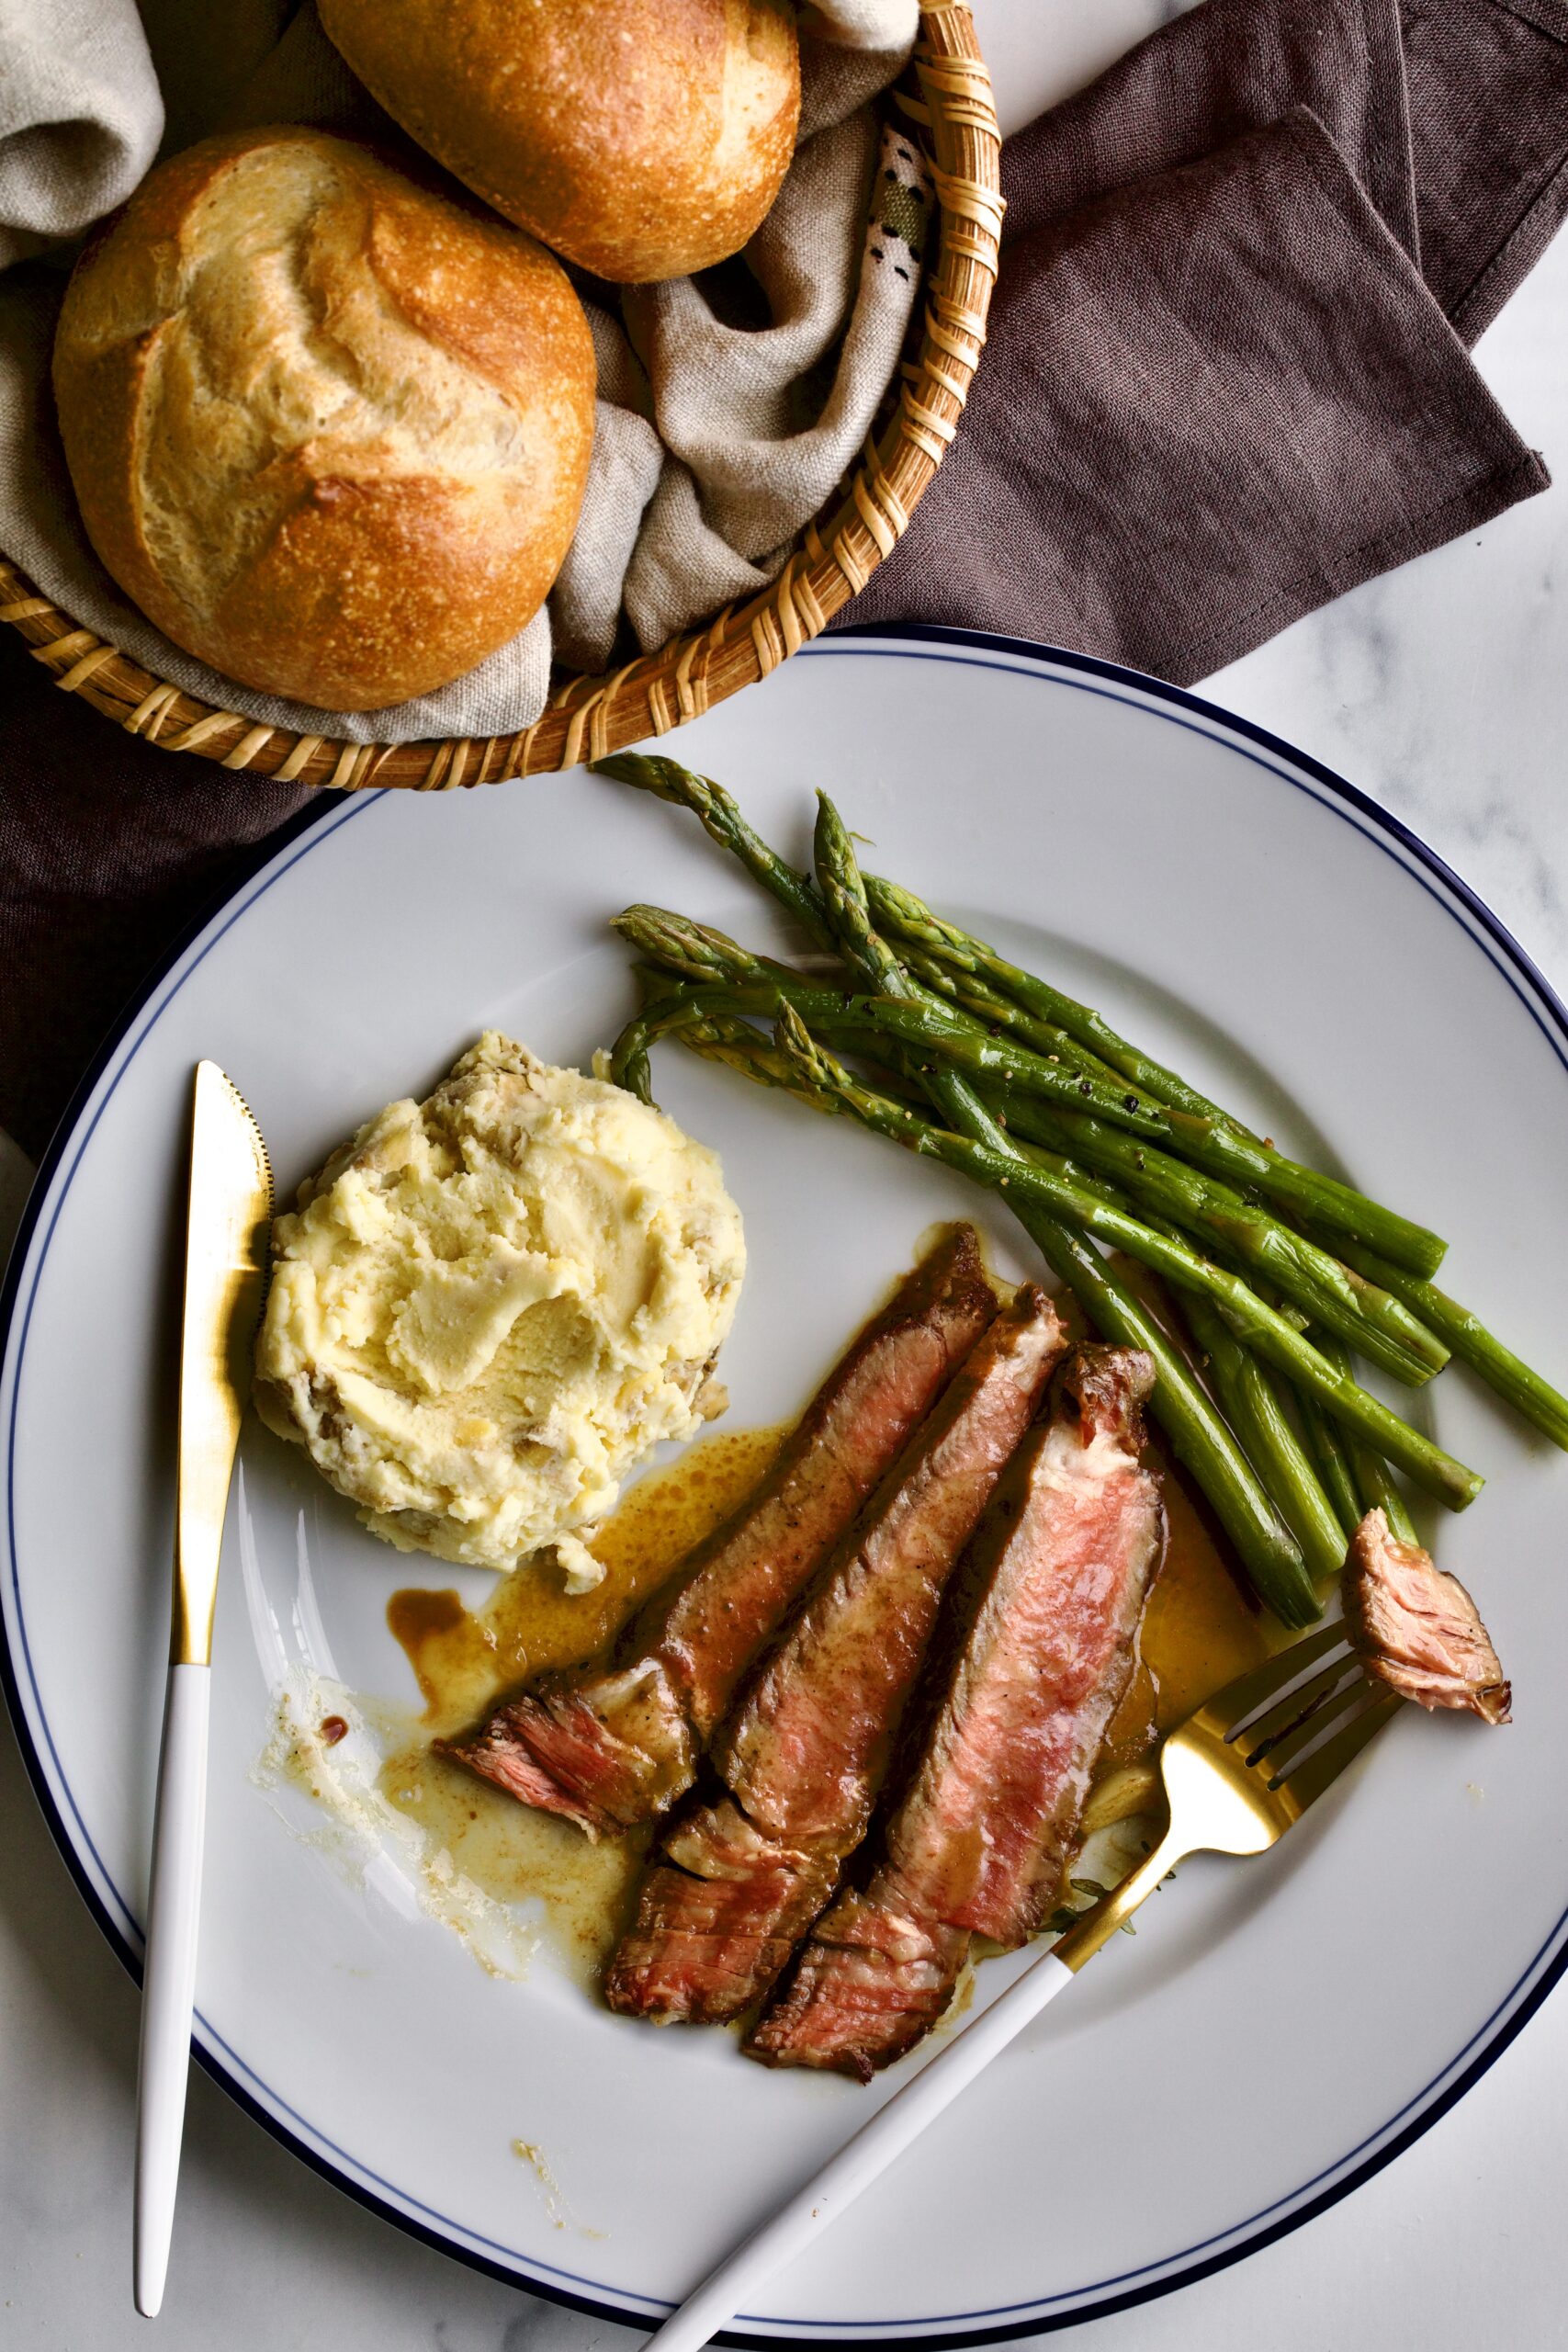 steak slices on a plate with mashed potatoes and asparagus. with fork with a bread roll.